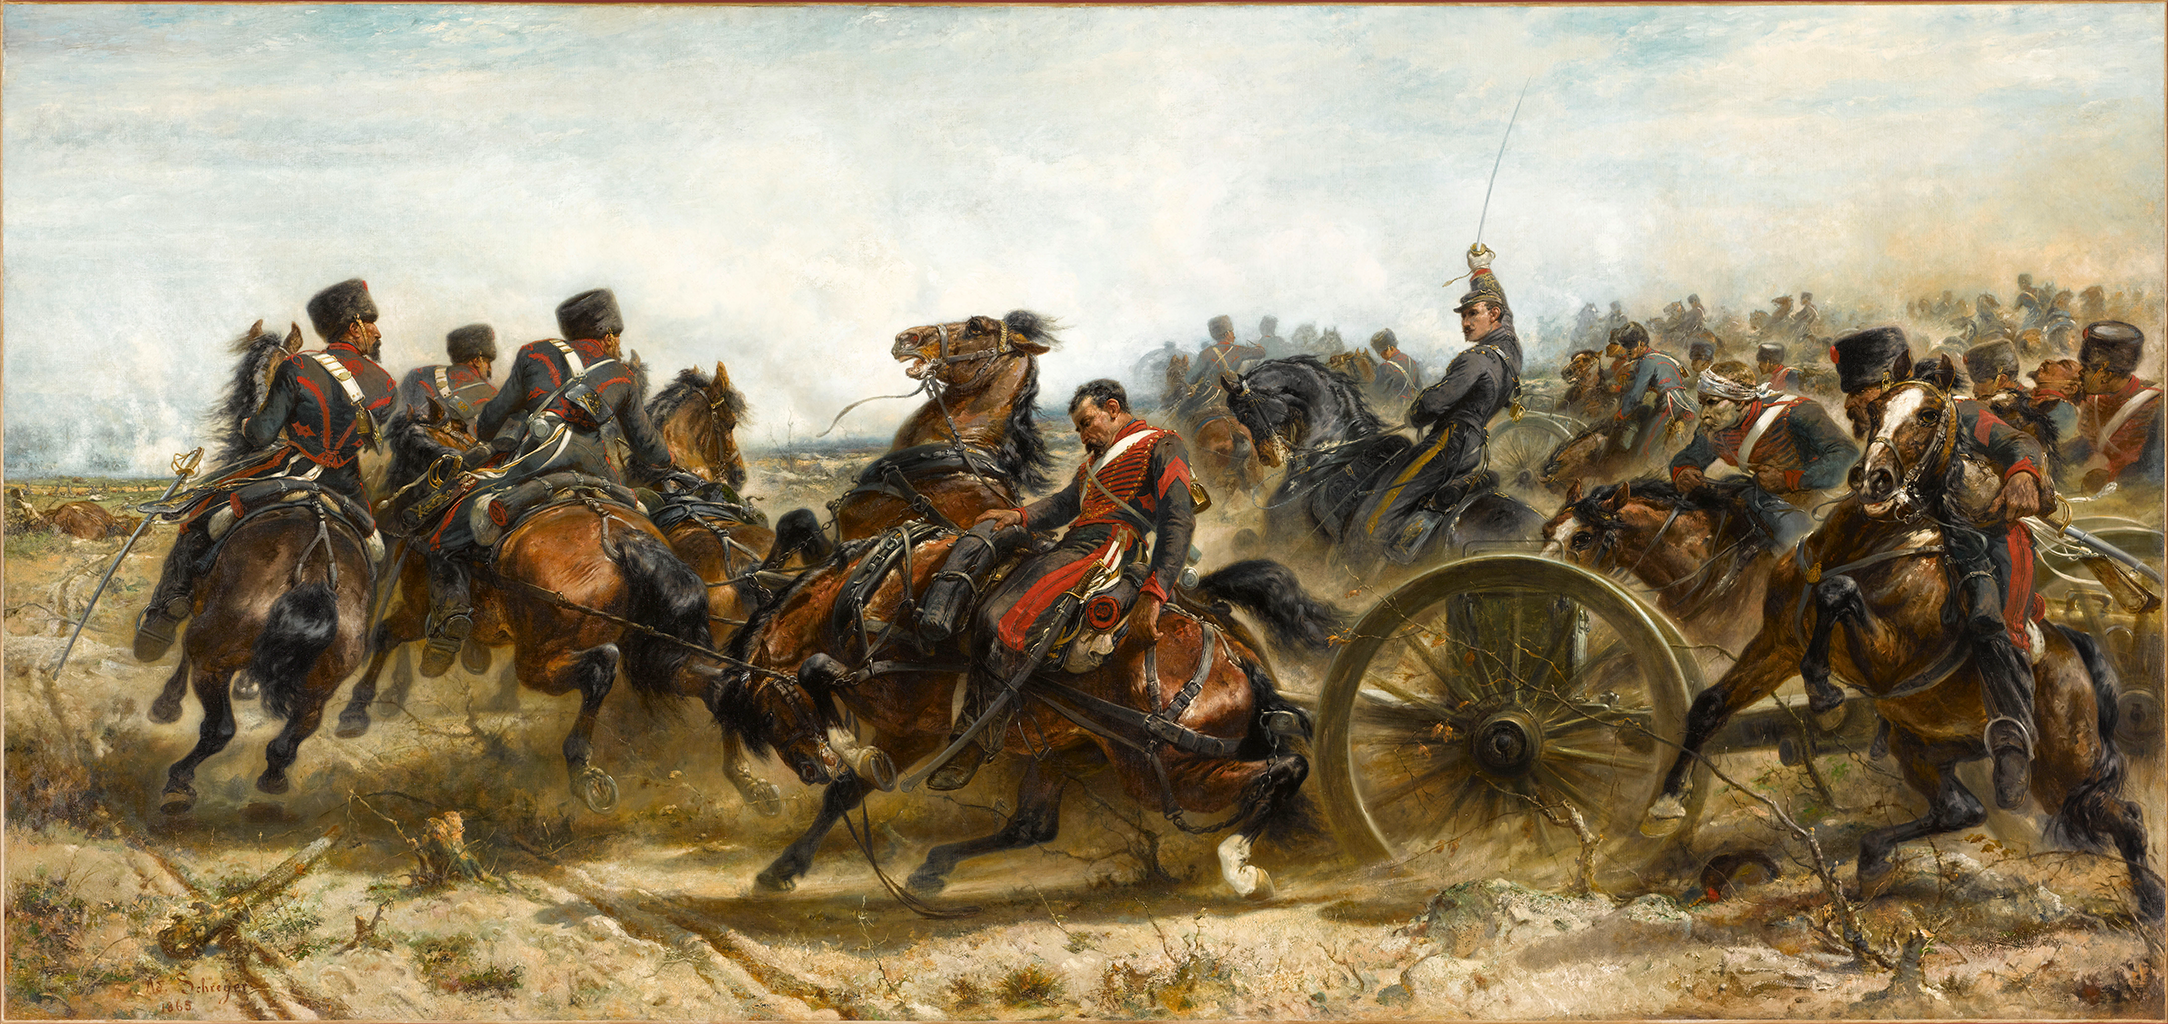 A painting of a large regiment of cavalry men charging to battle on their horses. The men wear and red and a mix of blue and black uniforms. The Scene is chaotic as the dust from the ground has been kicked up all around them. An officer raises his arm and holds his saber up high, while next to him, another soldier slumps backgrounds on his horse, appearing dead.